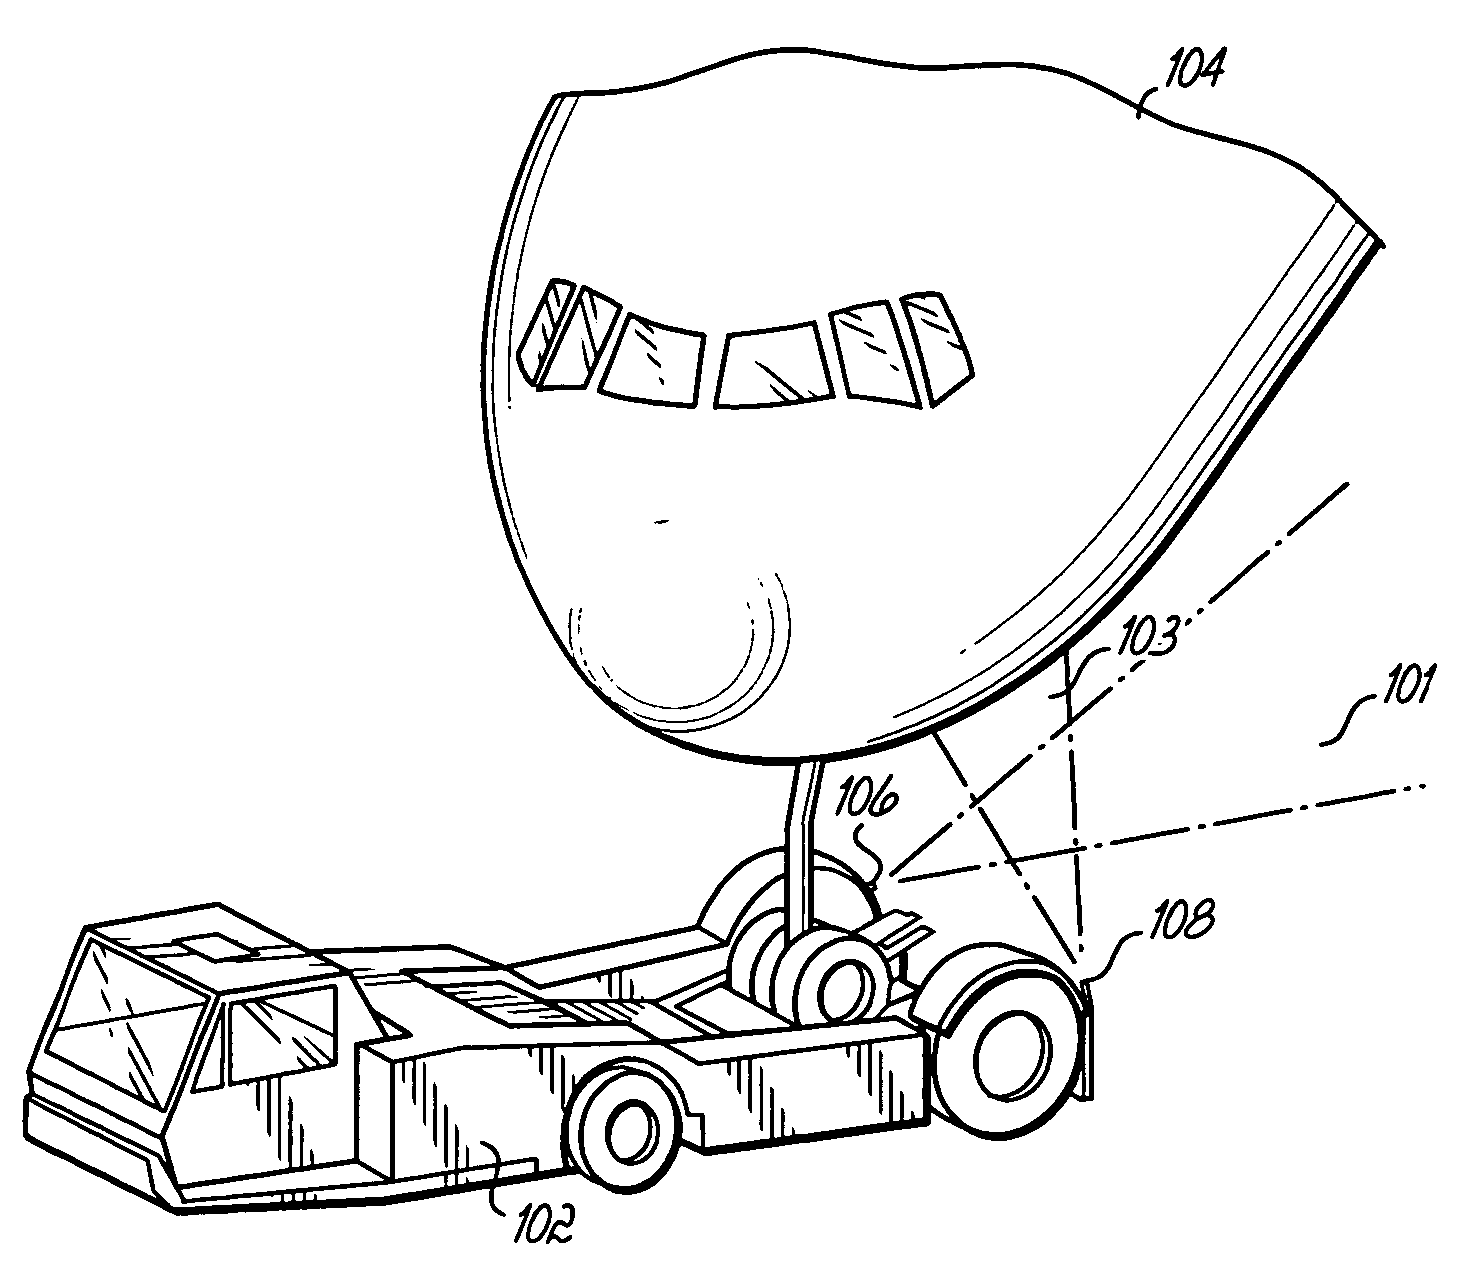 Method and system for over-steer avoidance